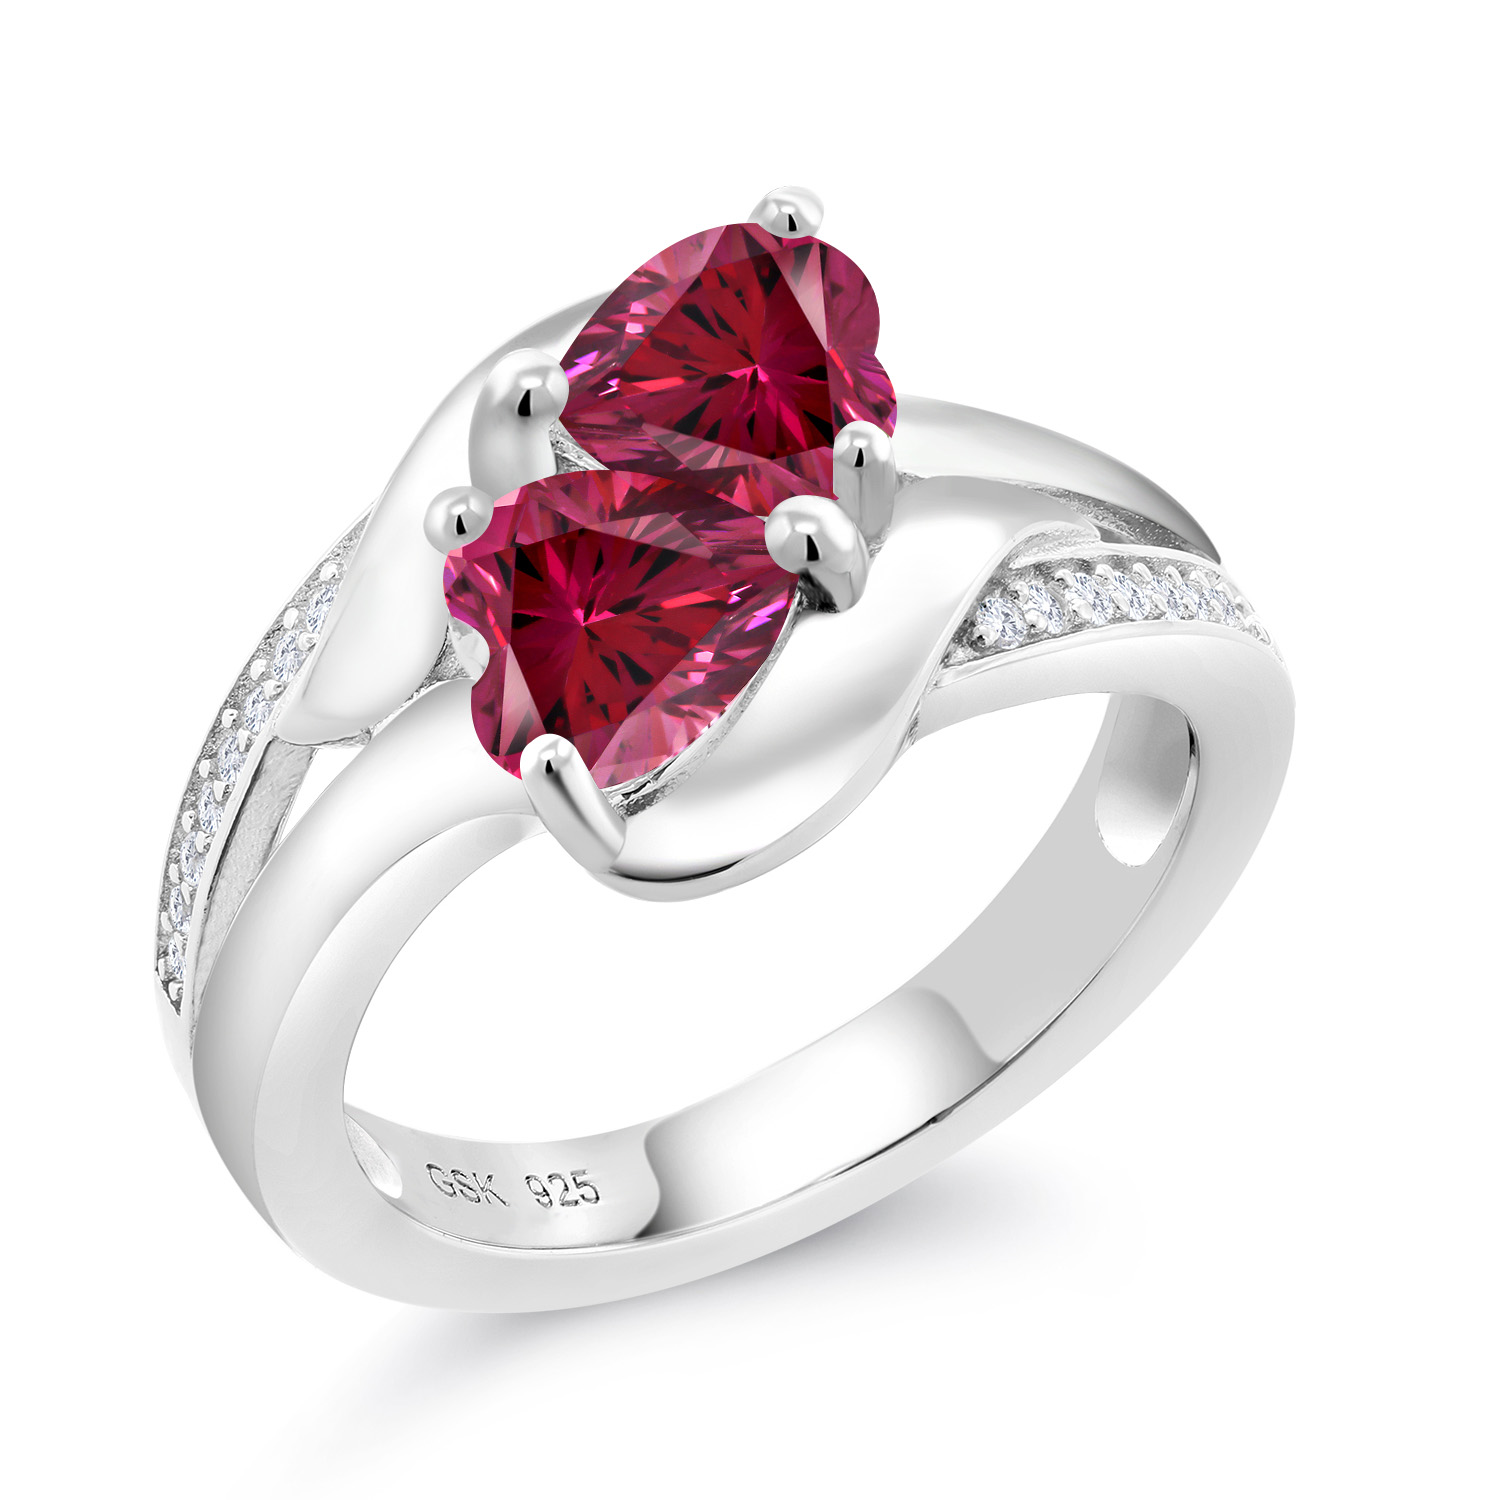 Gem Stone King 925 Silver Class Ring White Created Sapphire and Set with Red Zirconia